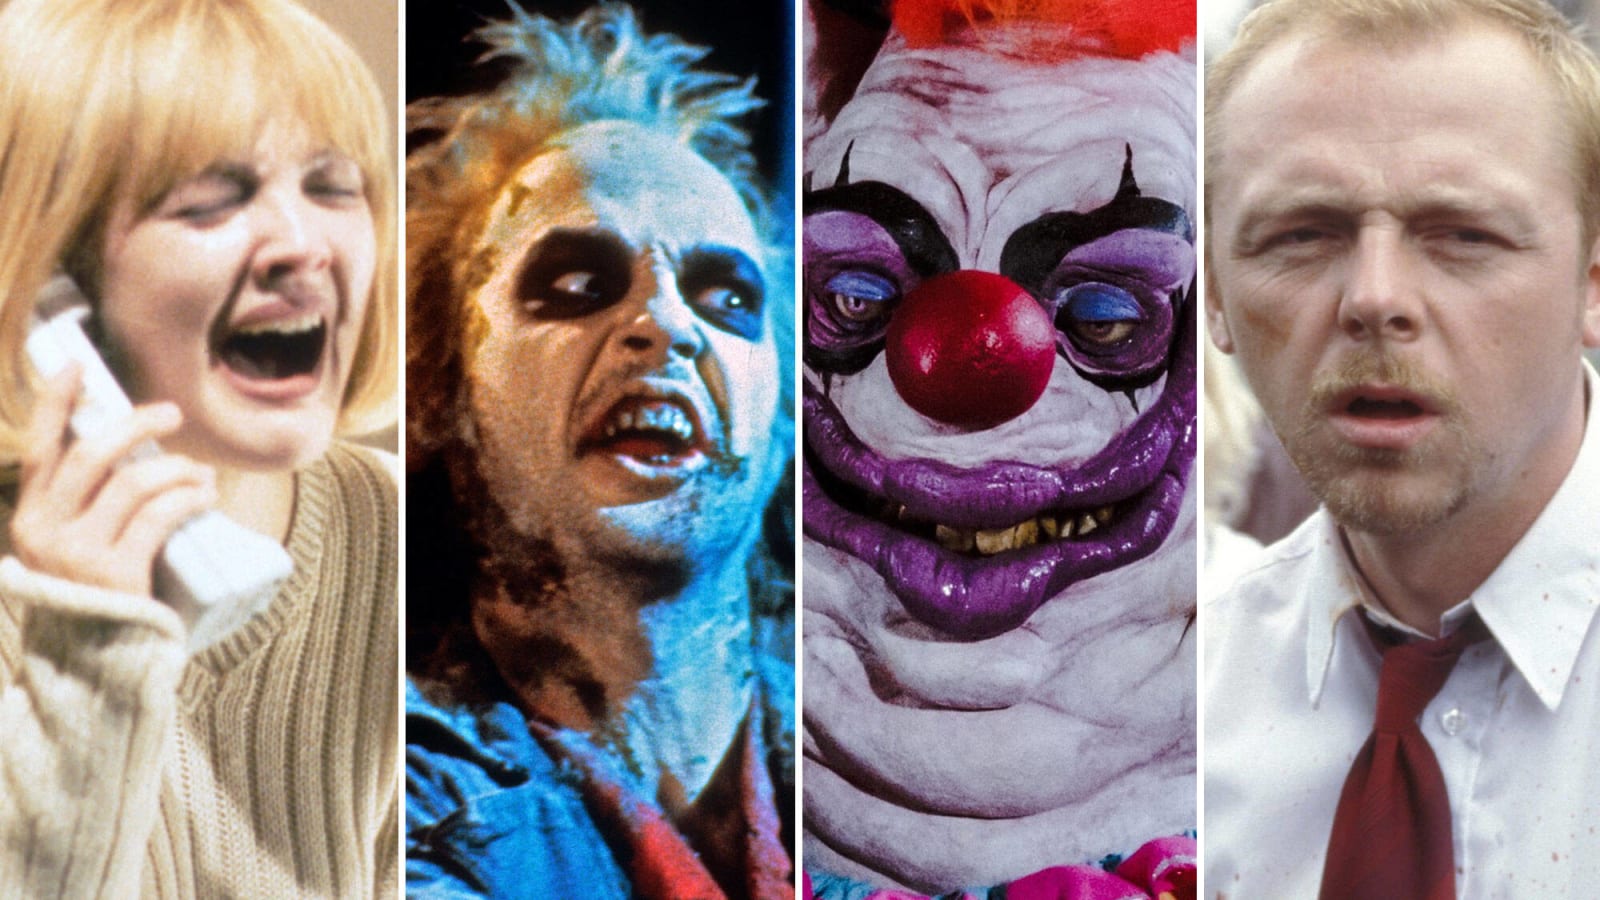 Dying from laughter: The 25 most memorable horror comedies